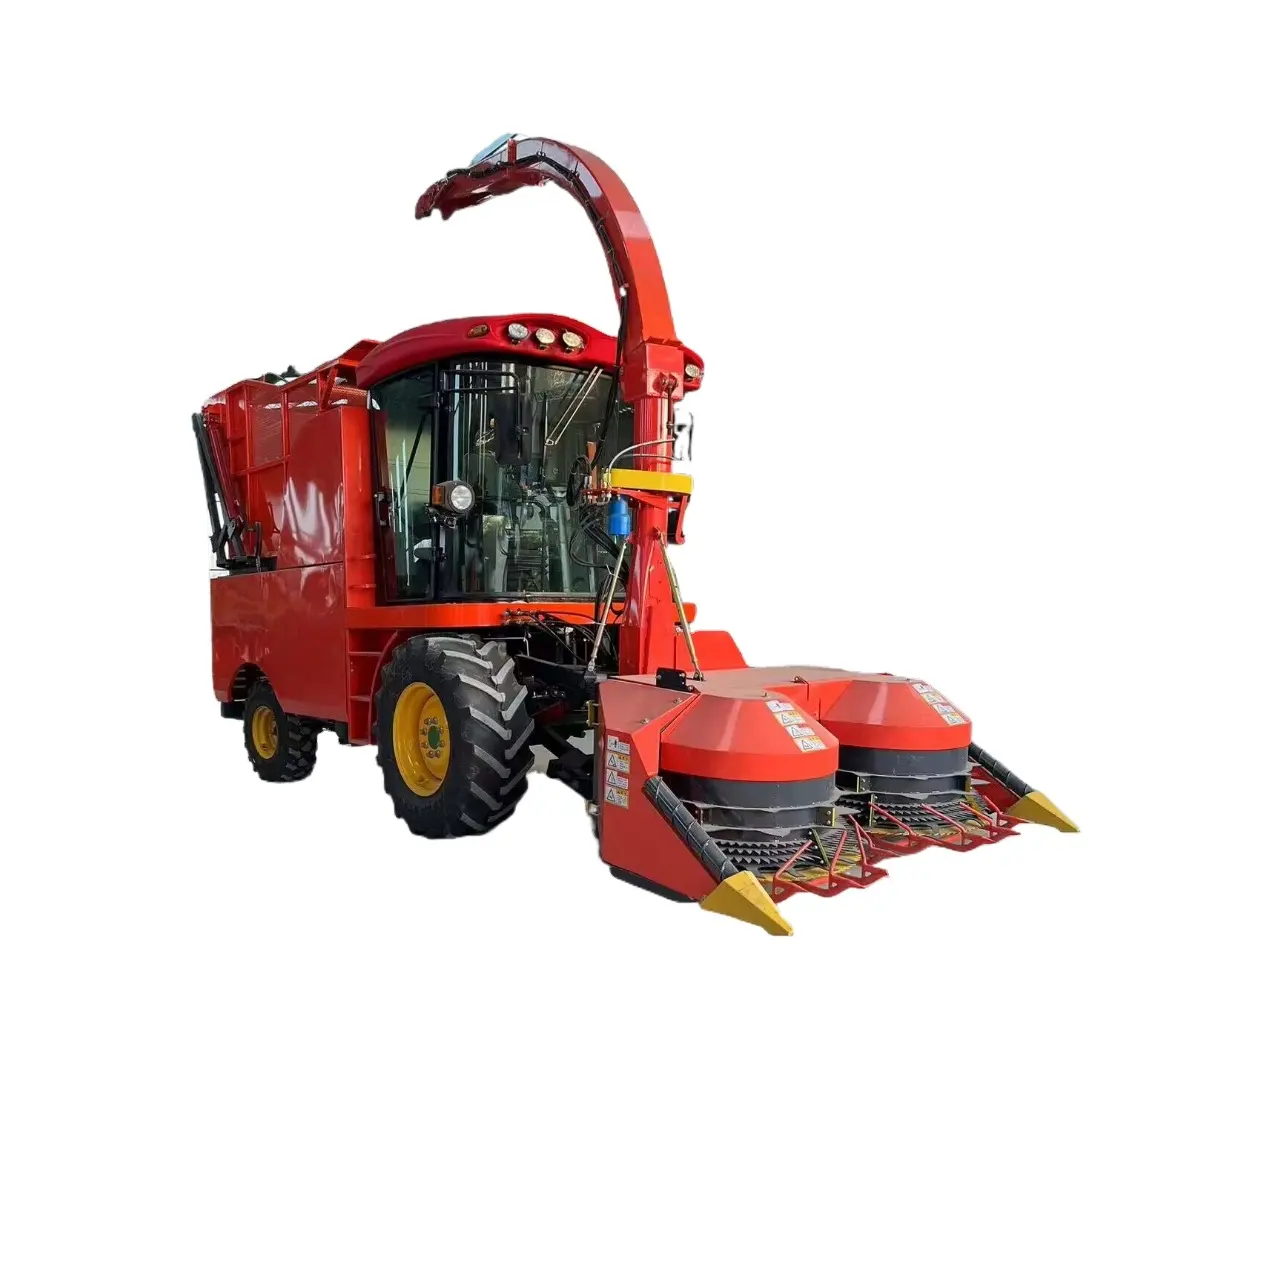 Backpack corn ranch feed harvester and crusher